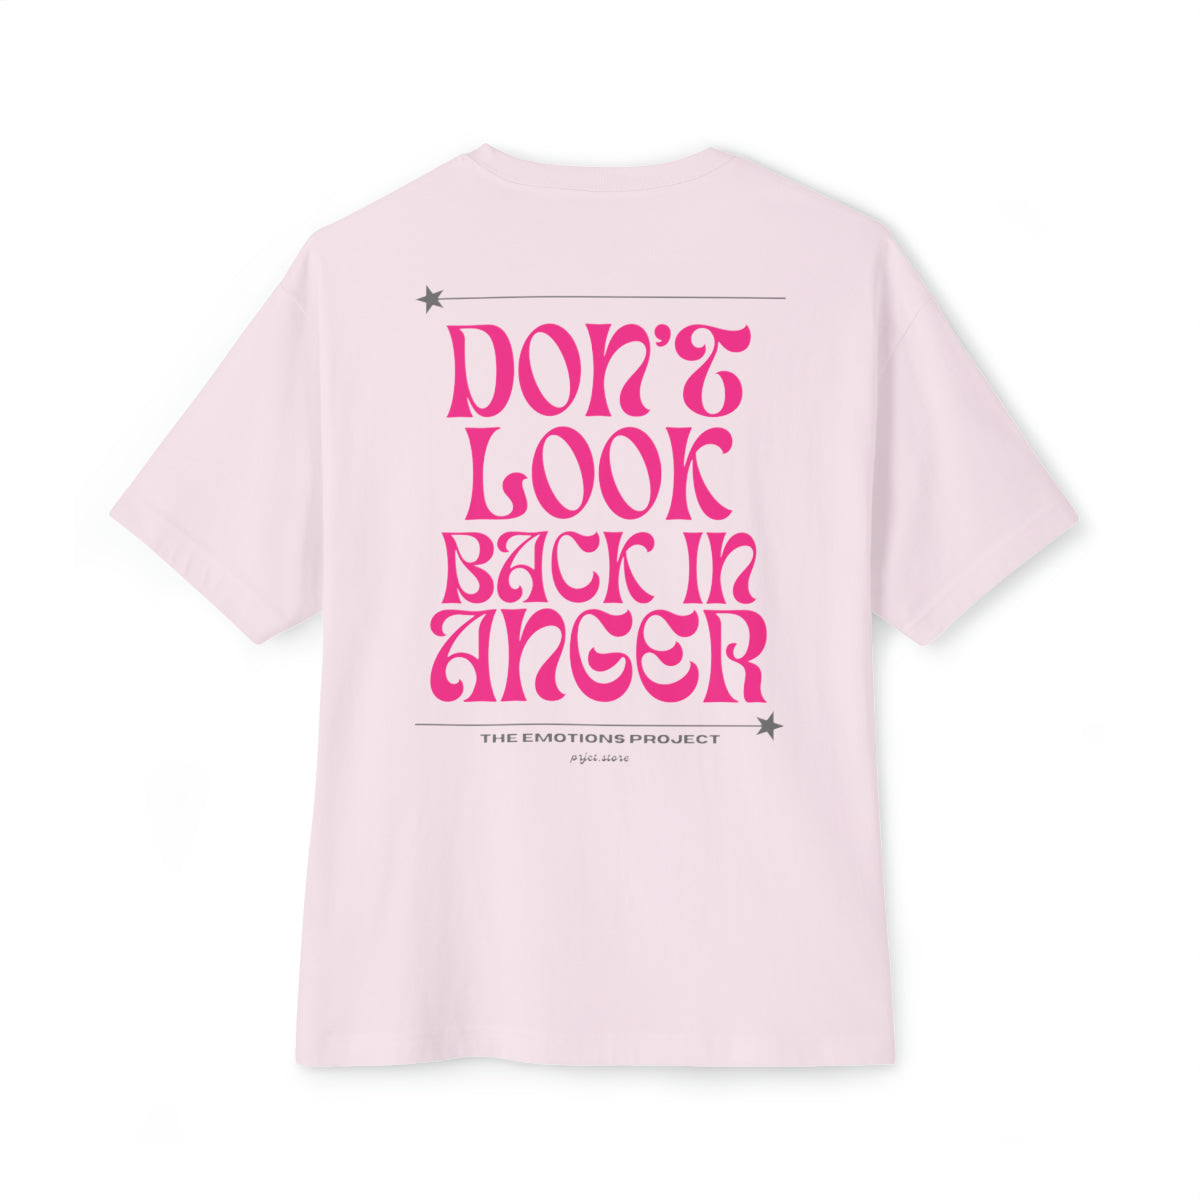 "Don't Look Back in Anger" Angry Emotions Tee - The Emotions Project (Pre-order)